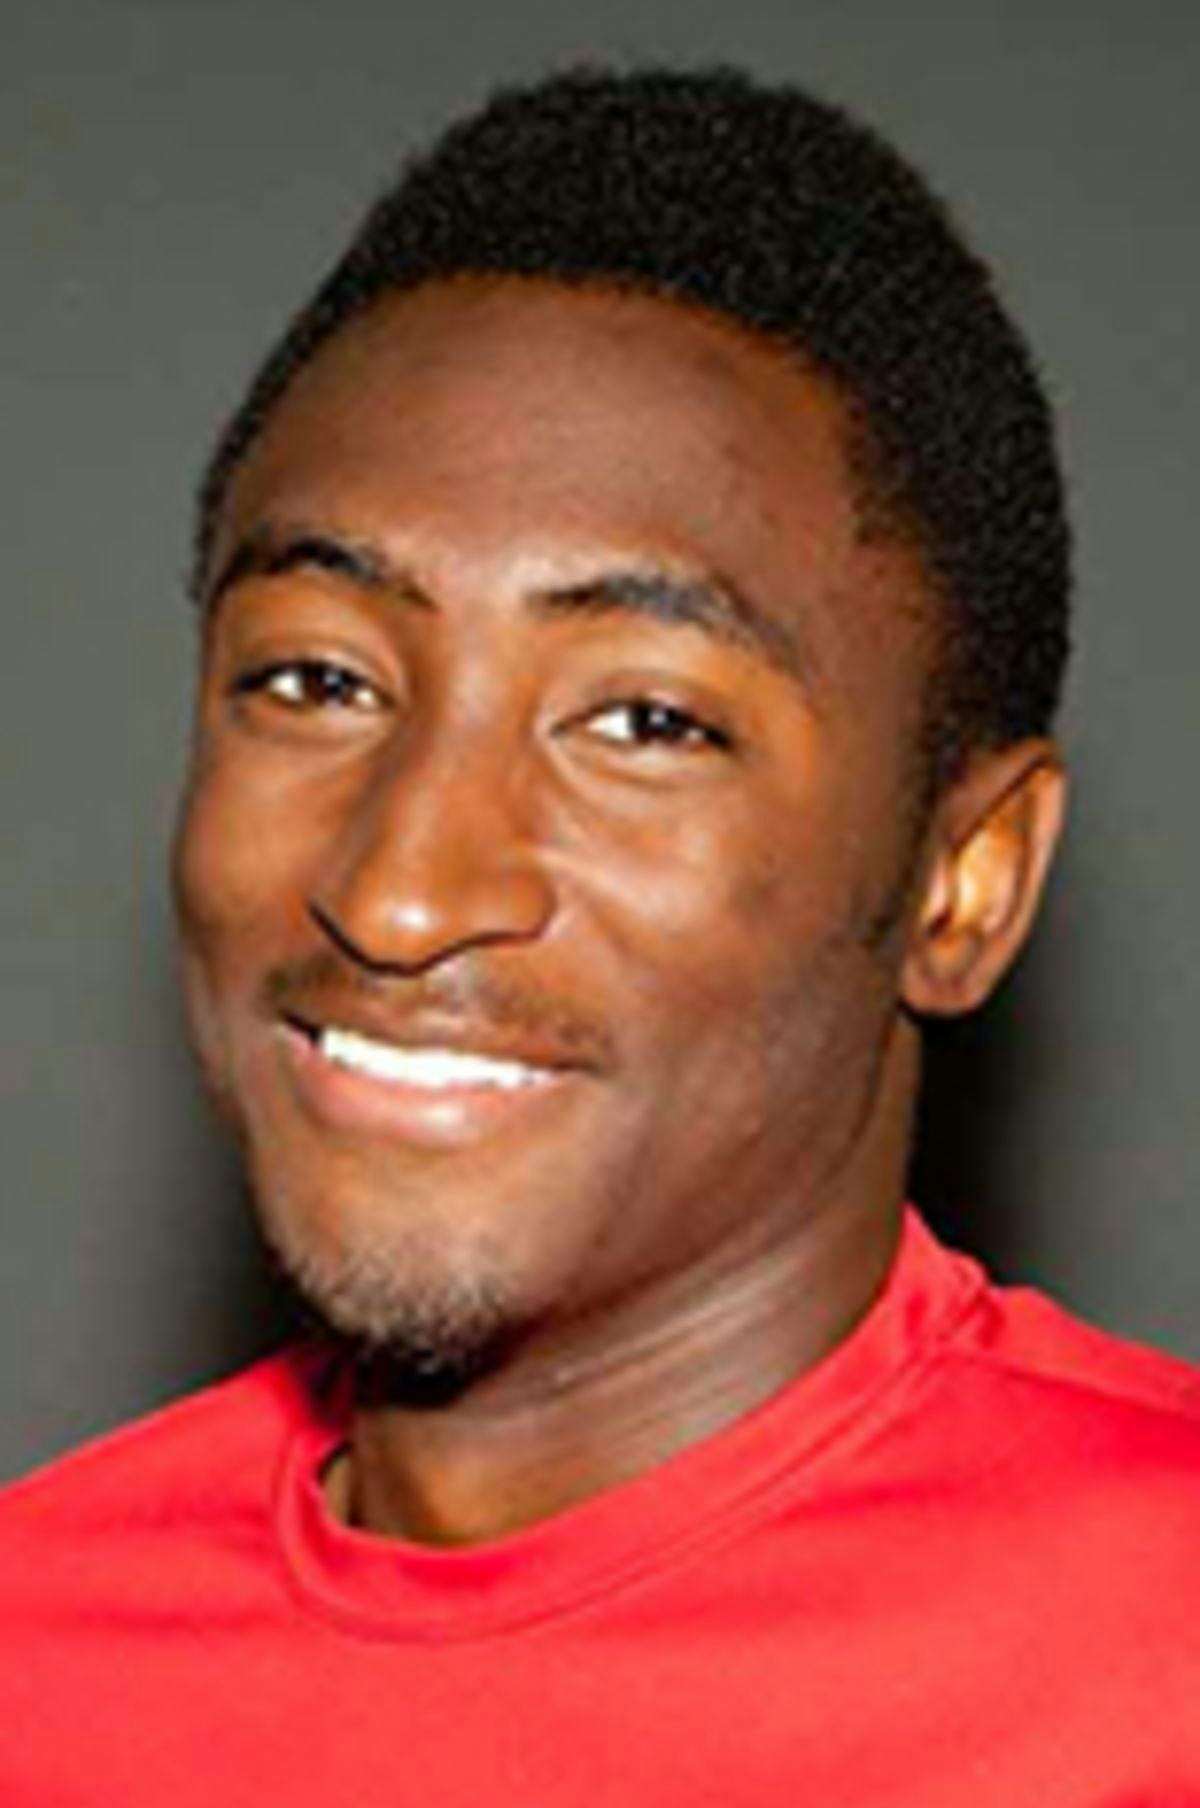 Headshot of Marques Brownlee